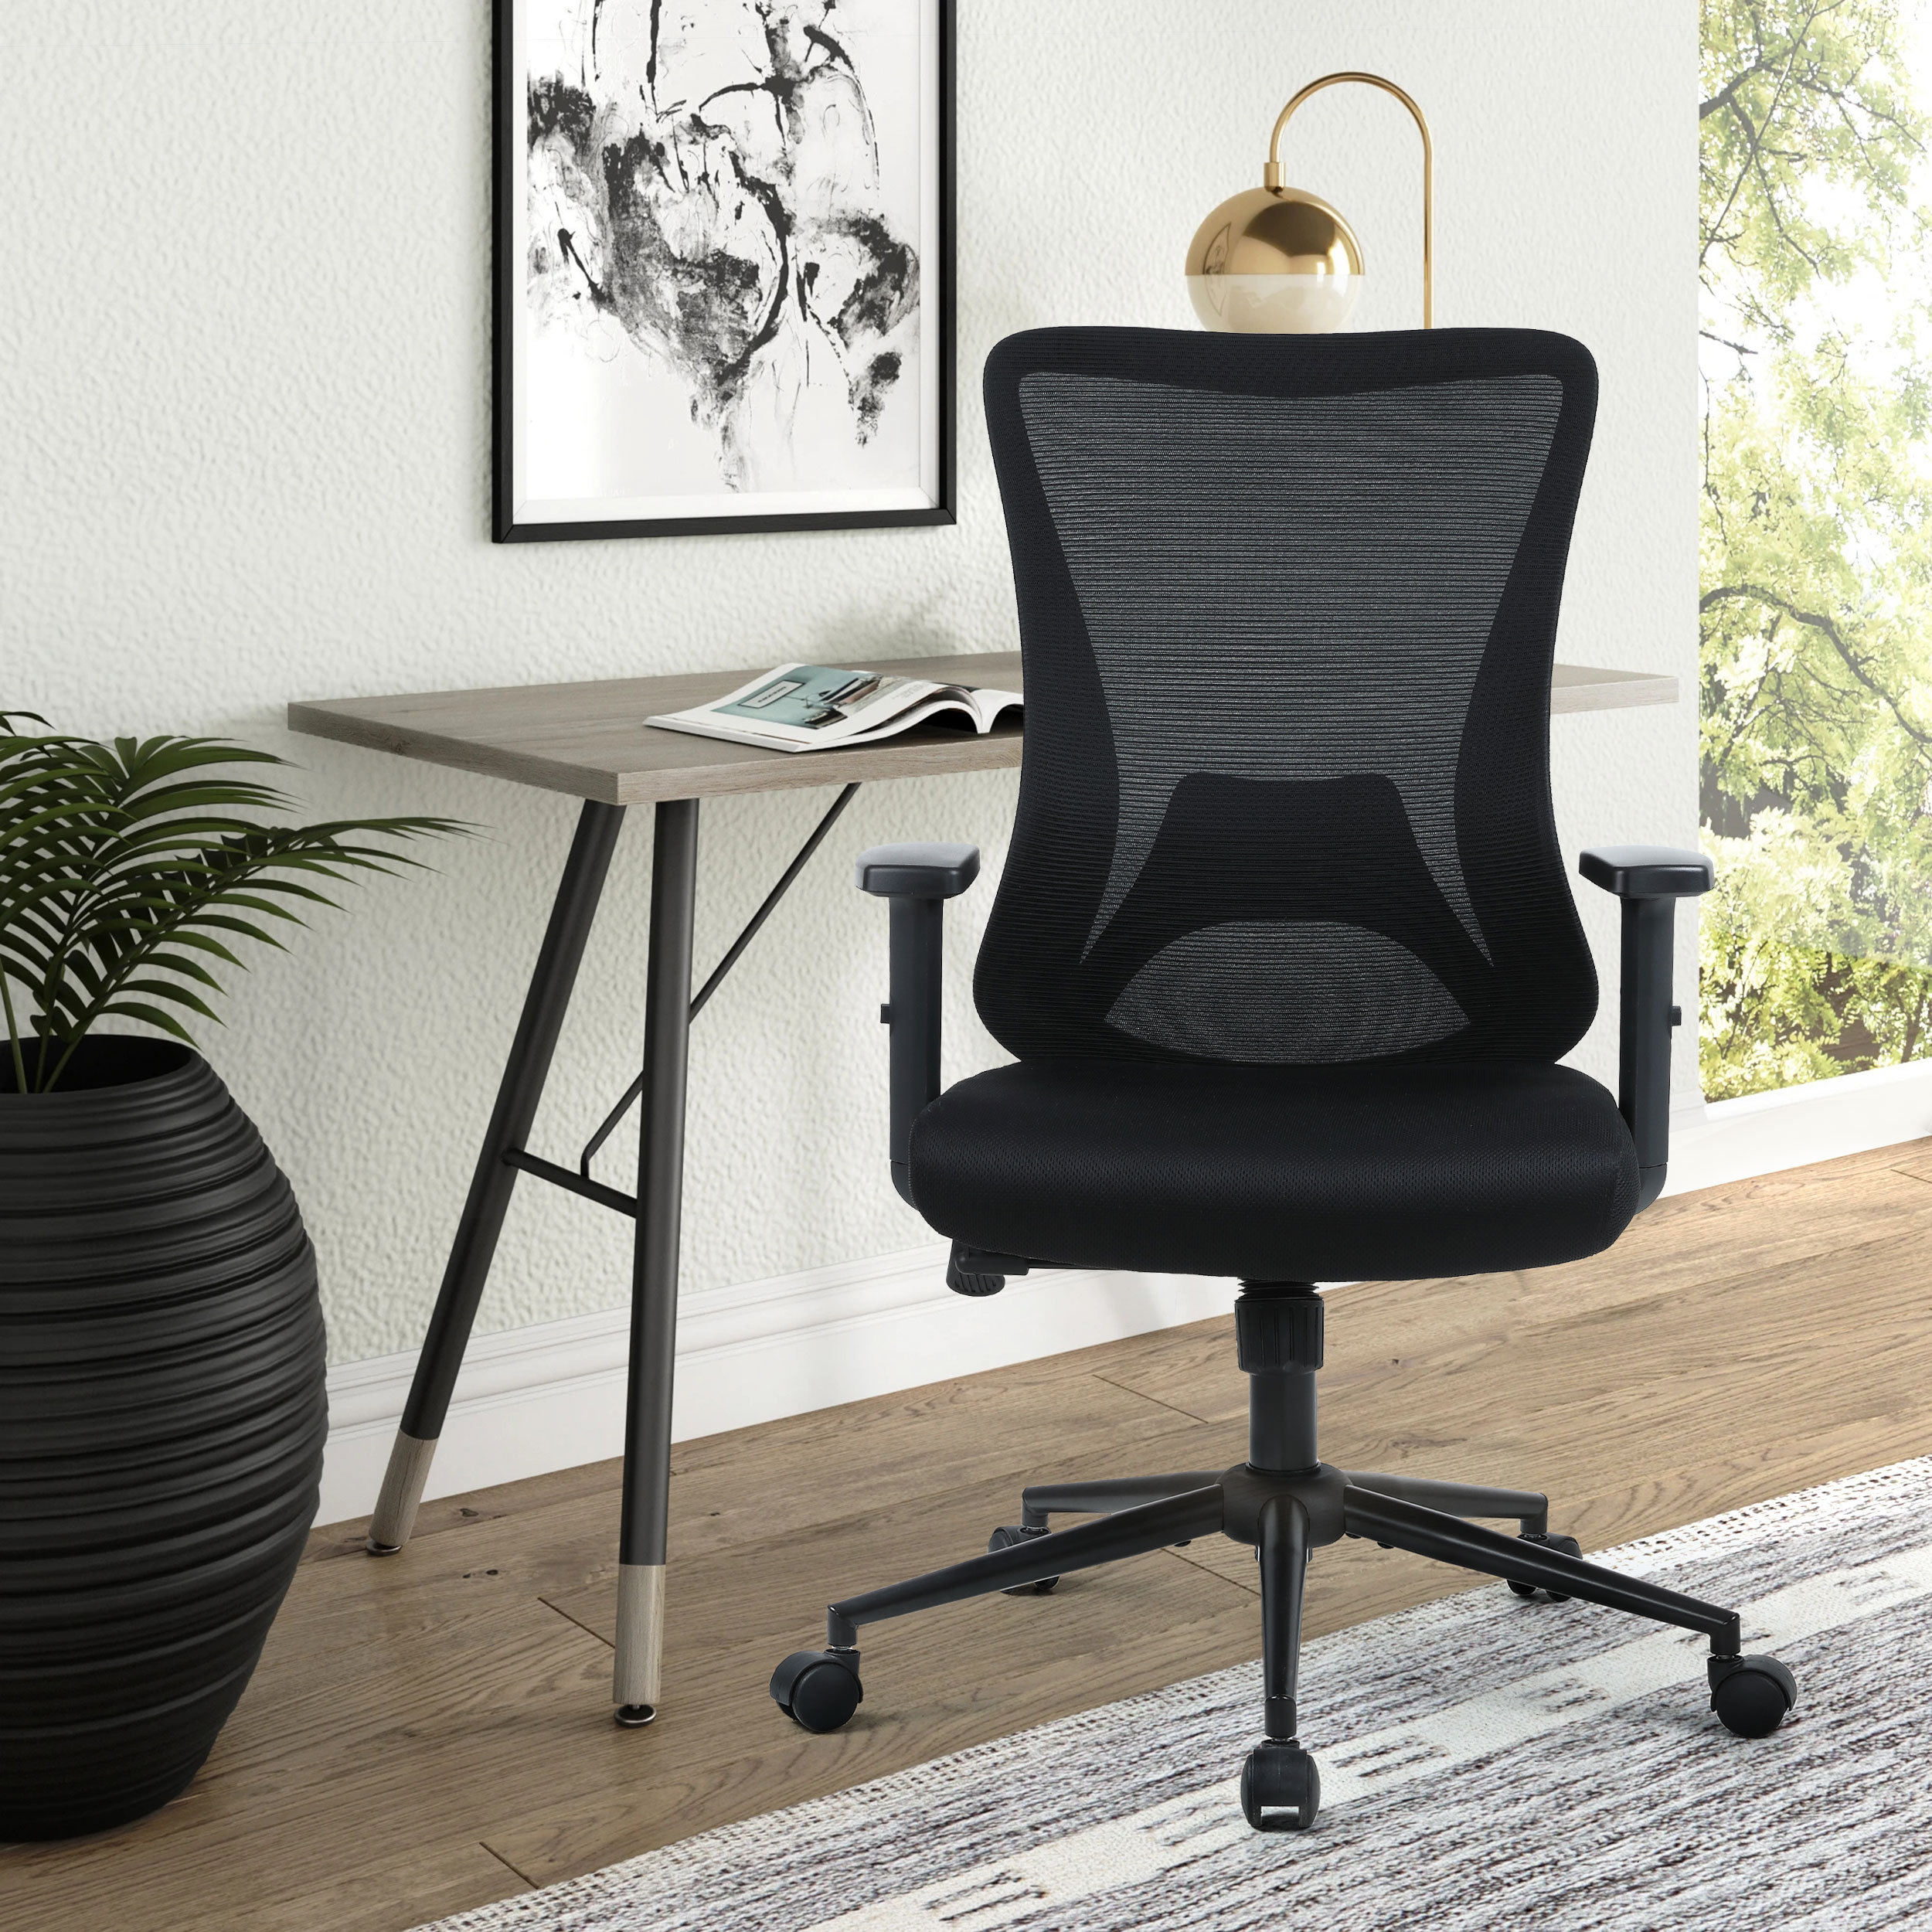 Isairis Ergonomic Office Chair with Adjustable Headrest and Armrests Inbox Zero Frame Color: Black